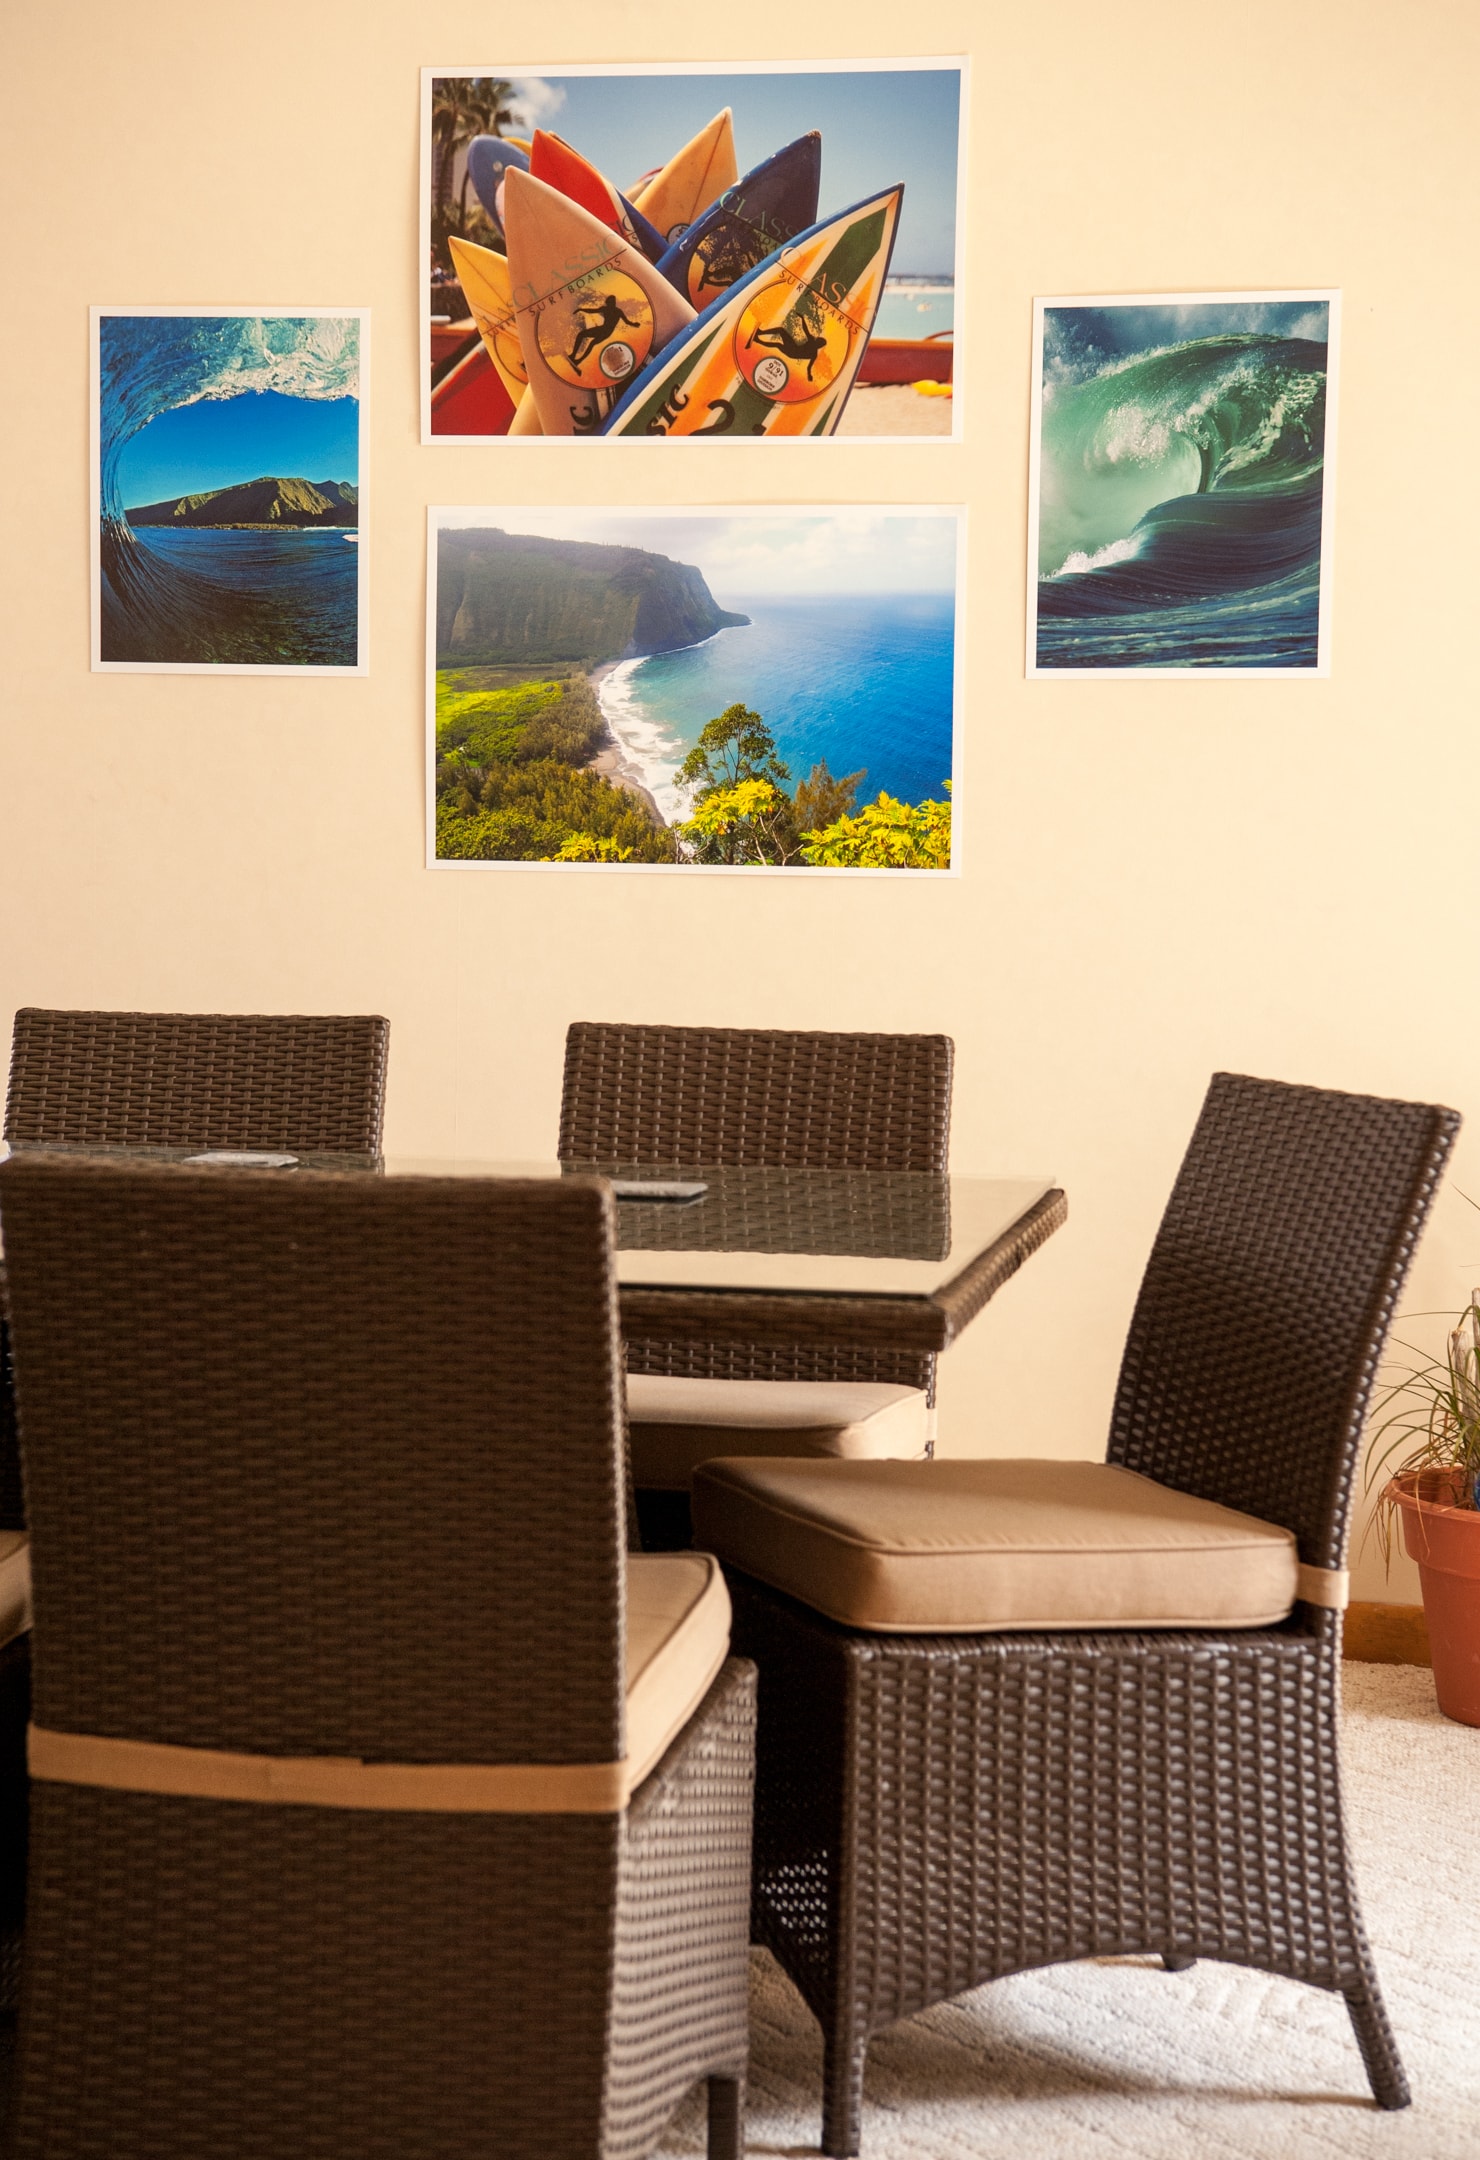 Conference Room at Kokua Technologies